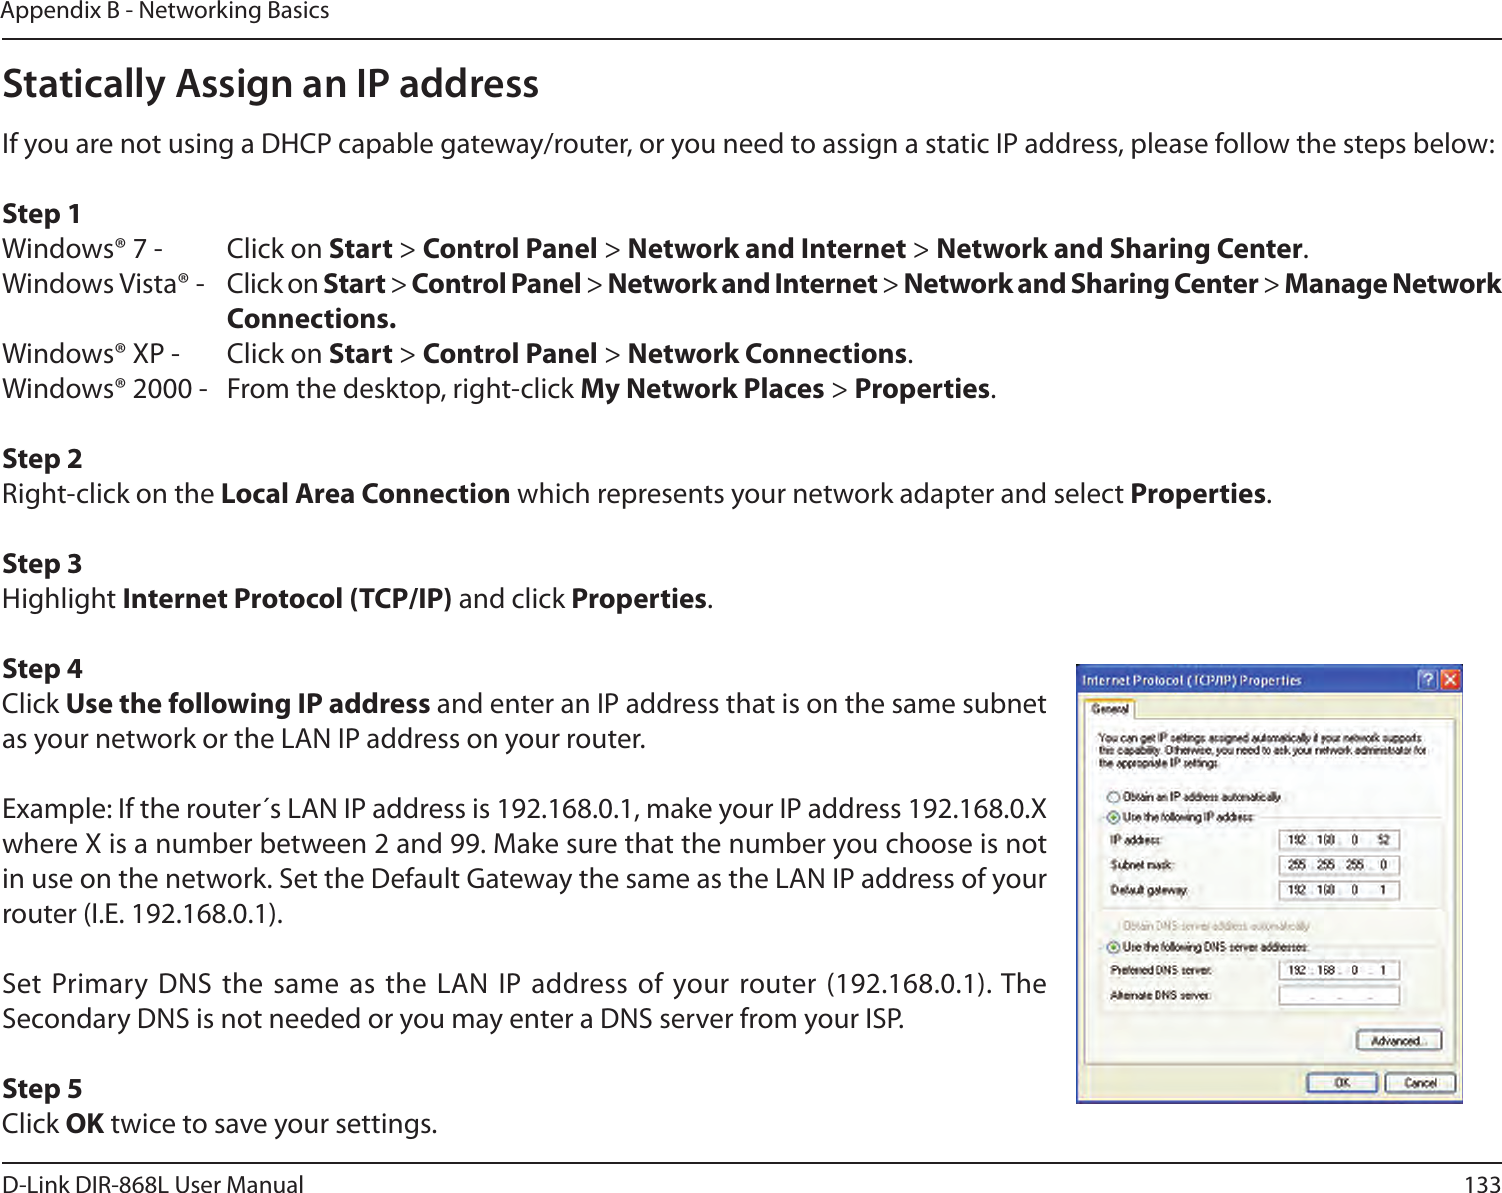 133D-Link DIR-868L User ManualAppendix B - Networking BasicsStatically Assign an IP addressIf you are not using a DHCP capable gateway/router, or you need to assign a static IP address, please follow the steps below:Step 1Windows® 7 -  Click on Start &gt; Control Panel &gt; Network and Internet &gt; Network and Sharing Center.Windows Vista® -  Click on Start &gt; Control Panel &gt; Network and Internet &gt; Network and Sharing Center &gt; Manage Network      Connections.Windows® XP -  Click on Start &gt; Control Panel &gt; Network Connections.Windows® 2000 -  From the desktop, right-click My Network Places &gt; Properties.Step 2Right-click on the Local Area Connection which represents your network adapter and select Properties.Step 3Highlight Internet Protocol (TCP/IP) and click Properties.Step 4Click Use the following IP address and enter an IP address that is on the same subnet as your network or the LAN IP address on your router. Example: If the router´s LAN IP address is 192.168.0.1, make your IP address 192.168.0.X where X is a number between 2 and 99. Make sure that the number you choose is not in use on the network. Set the Default Gateway the same as the LAN IP address of your router (I.E. 192.168.0.1). Set Primary DNS  the same as the LAN IP address of  your router (192.168.0.1). The Secondary DNS is not needed or you may enter a DNS server from your ISP.Step 5Click OK twice to save your settings.